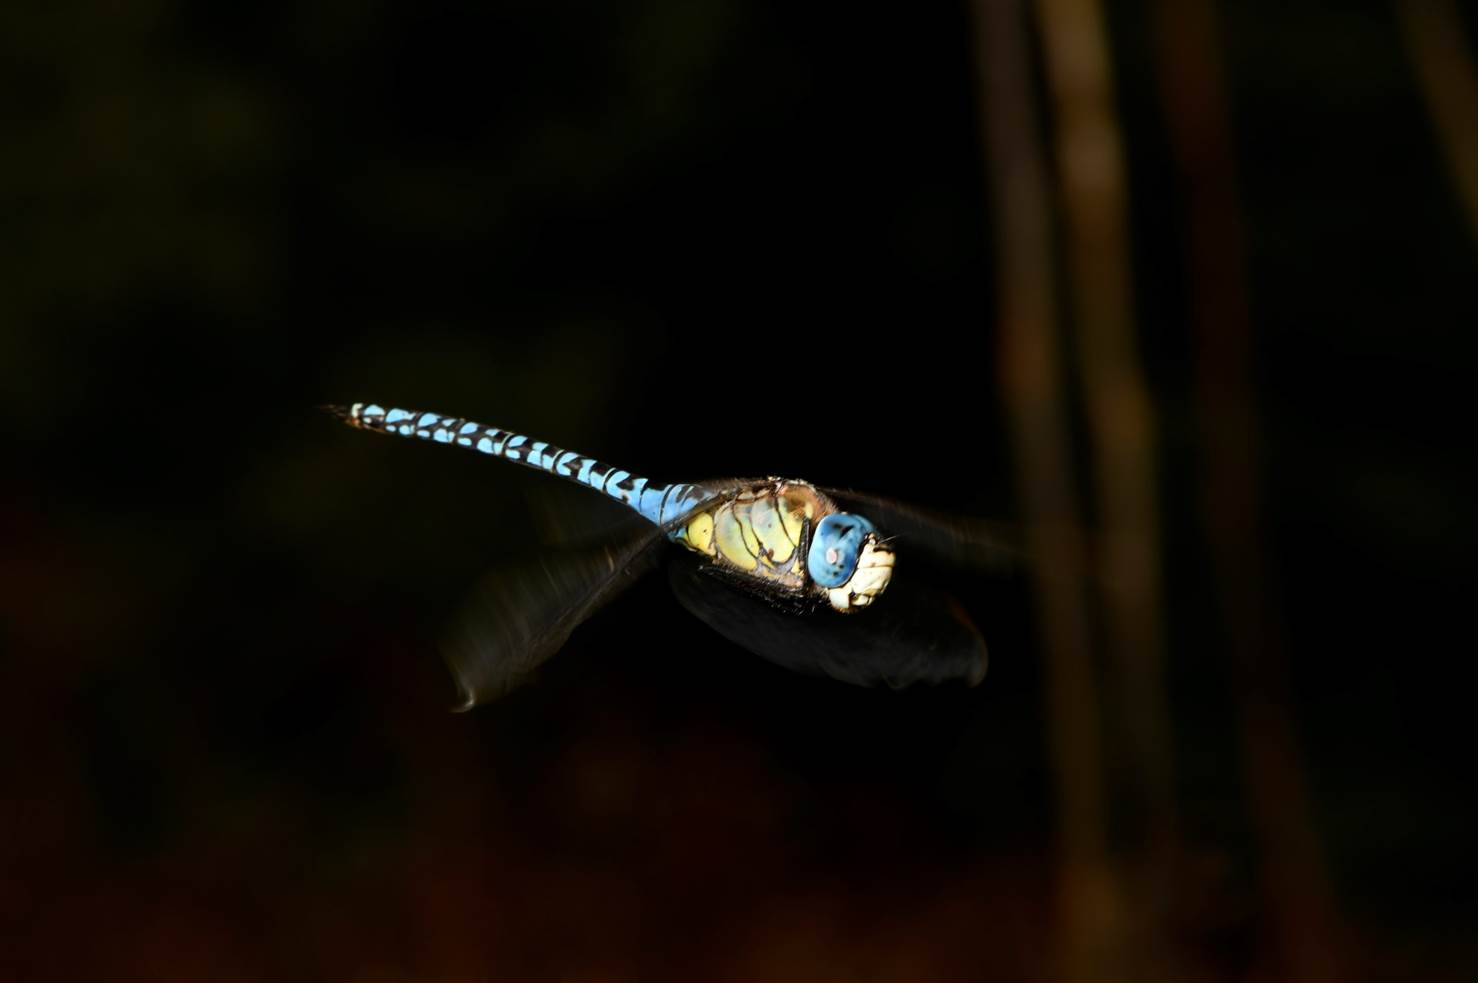 A dragonfly flying in the dark

Description automatically generated